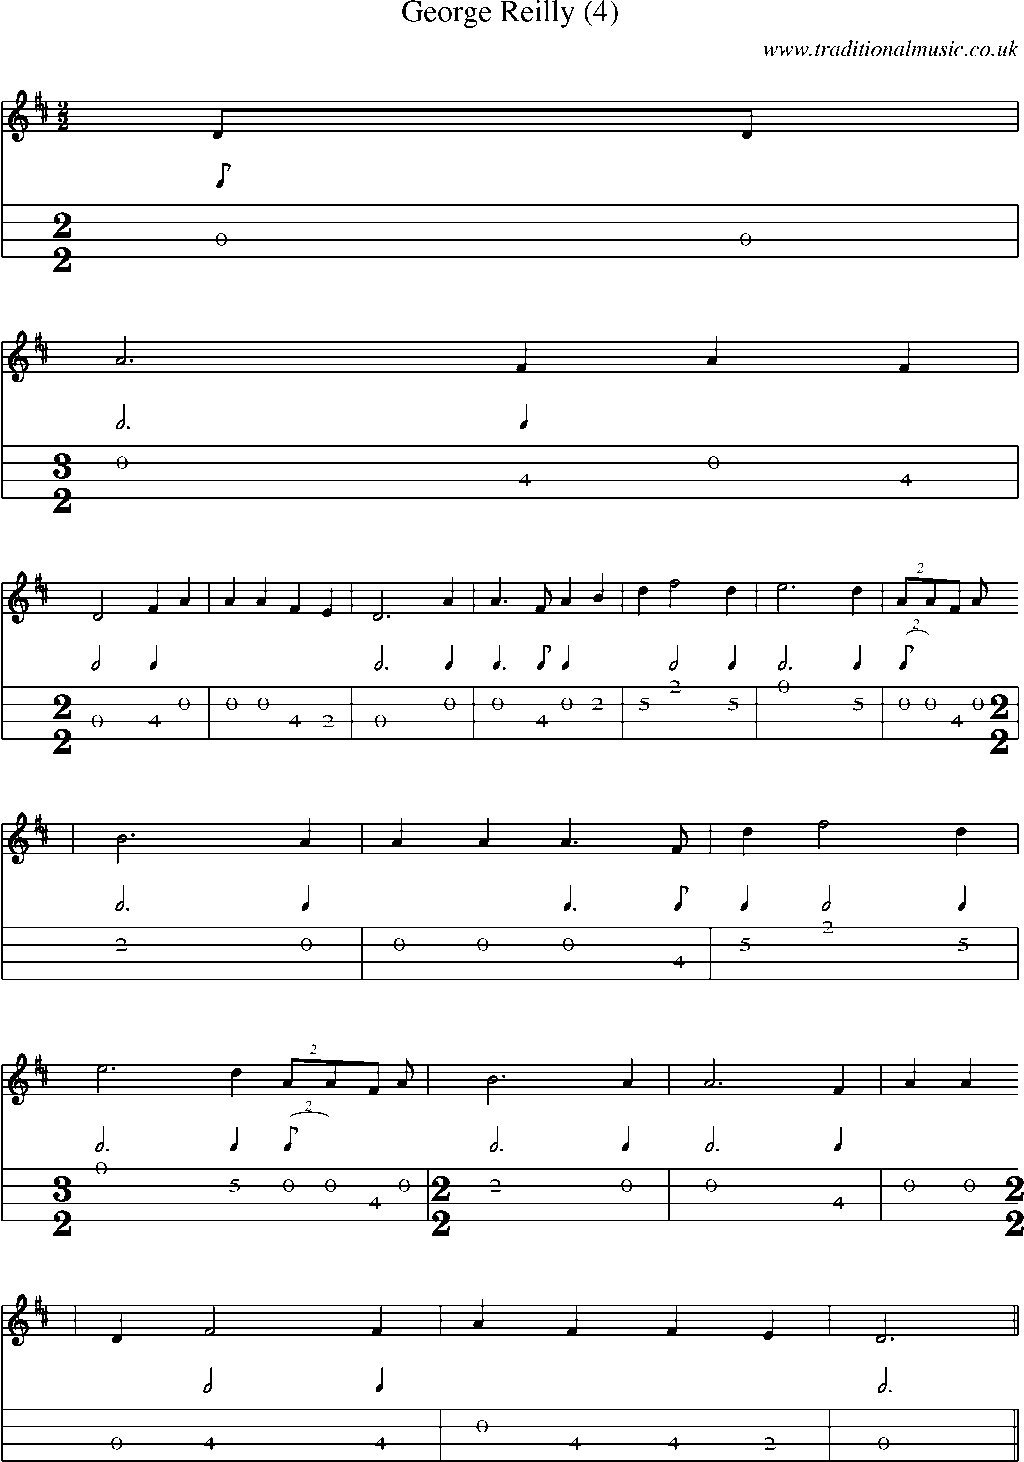 Mandolin Tab and Sheet Music for George Reilly (4)